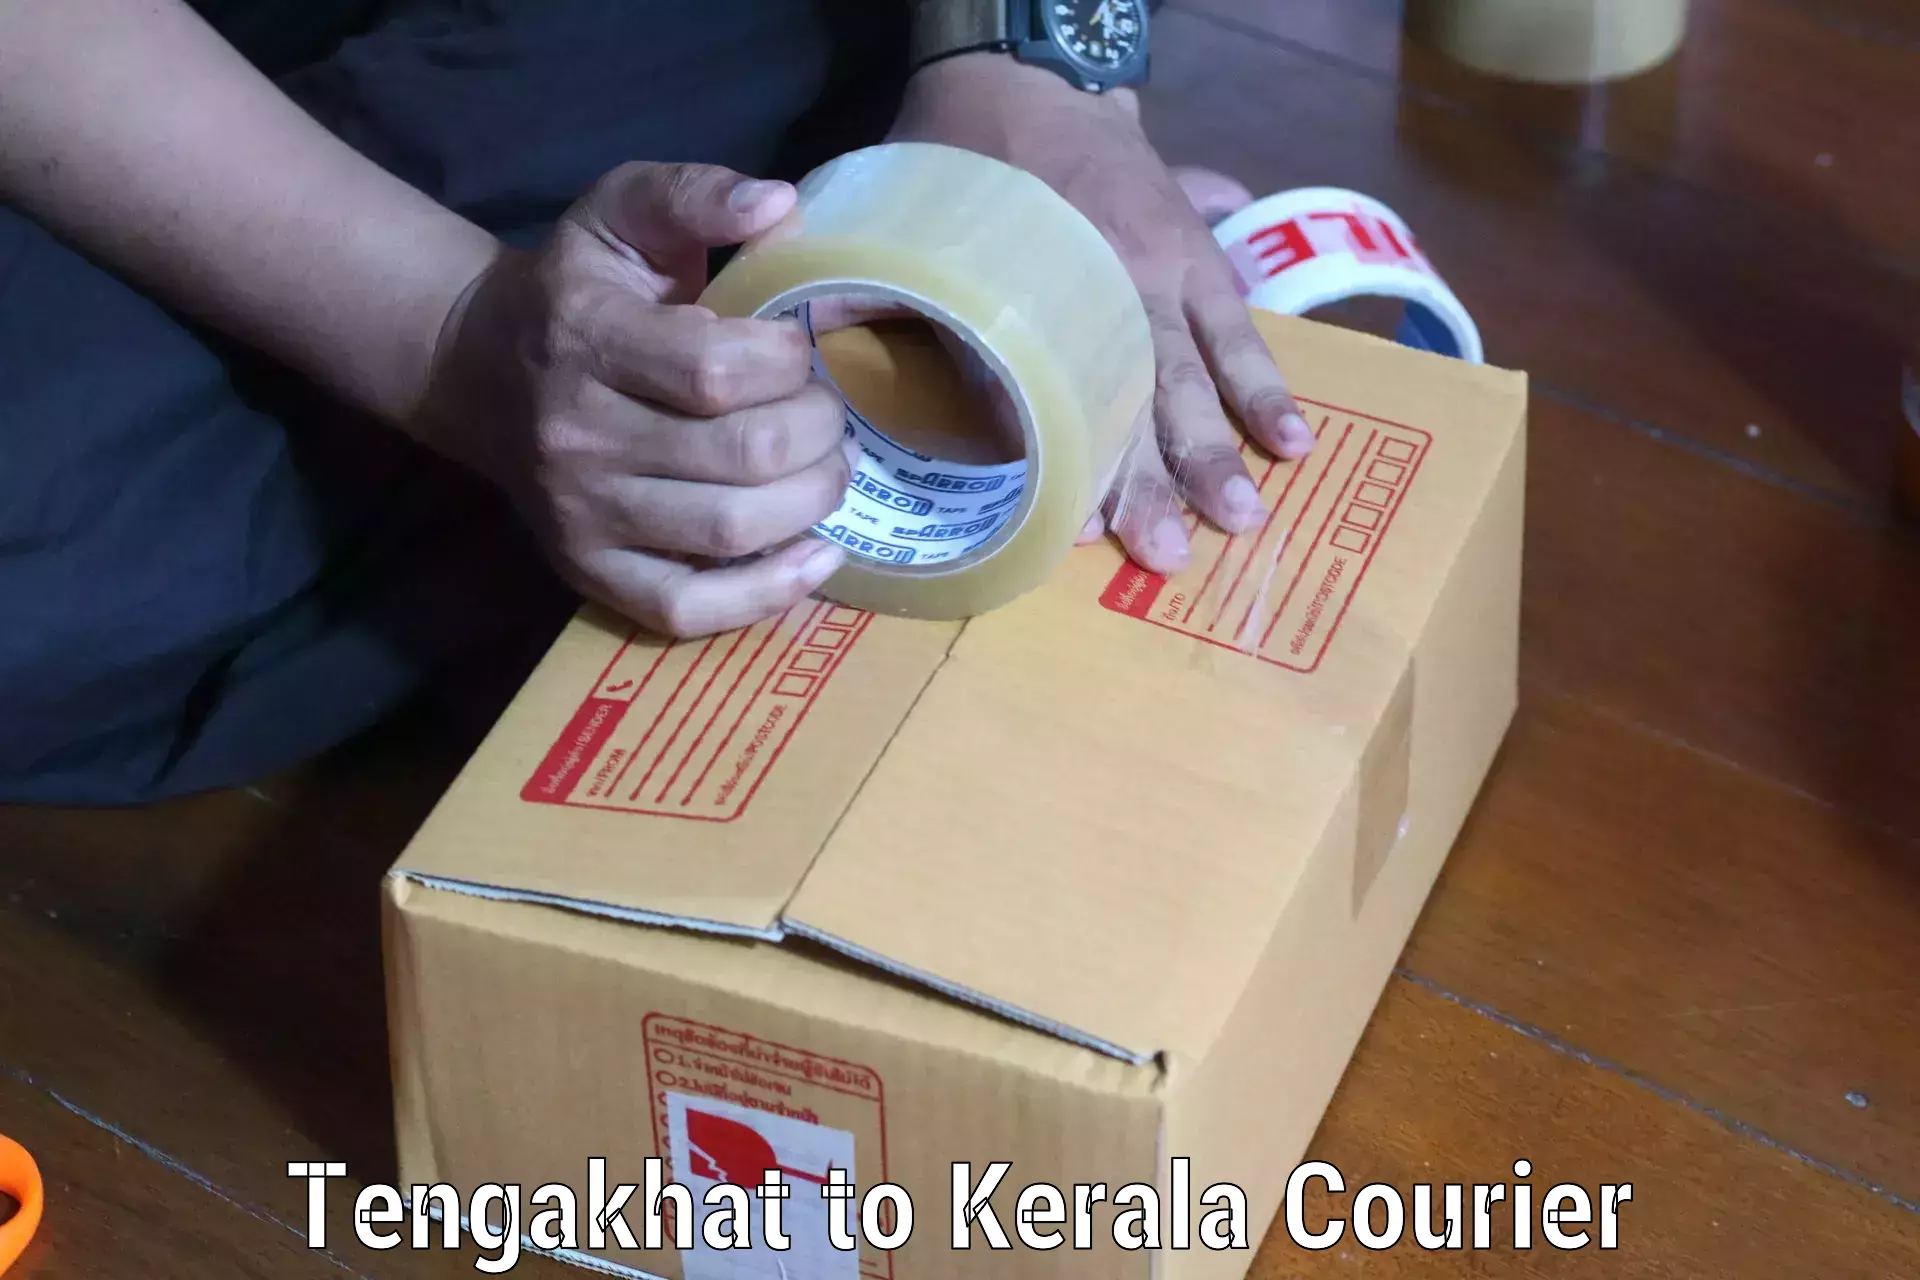 Reliable delivery network Tengakhat to Kazhakkoottam